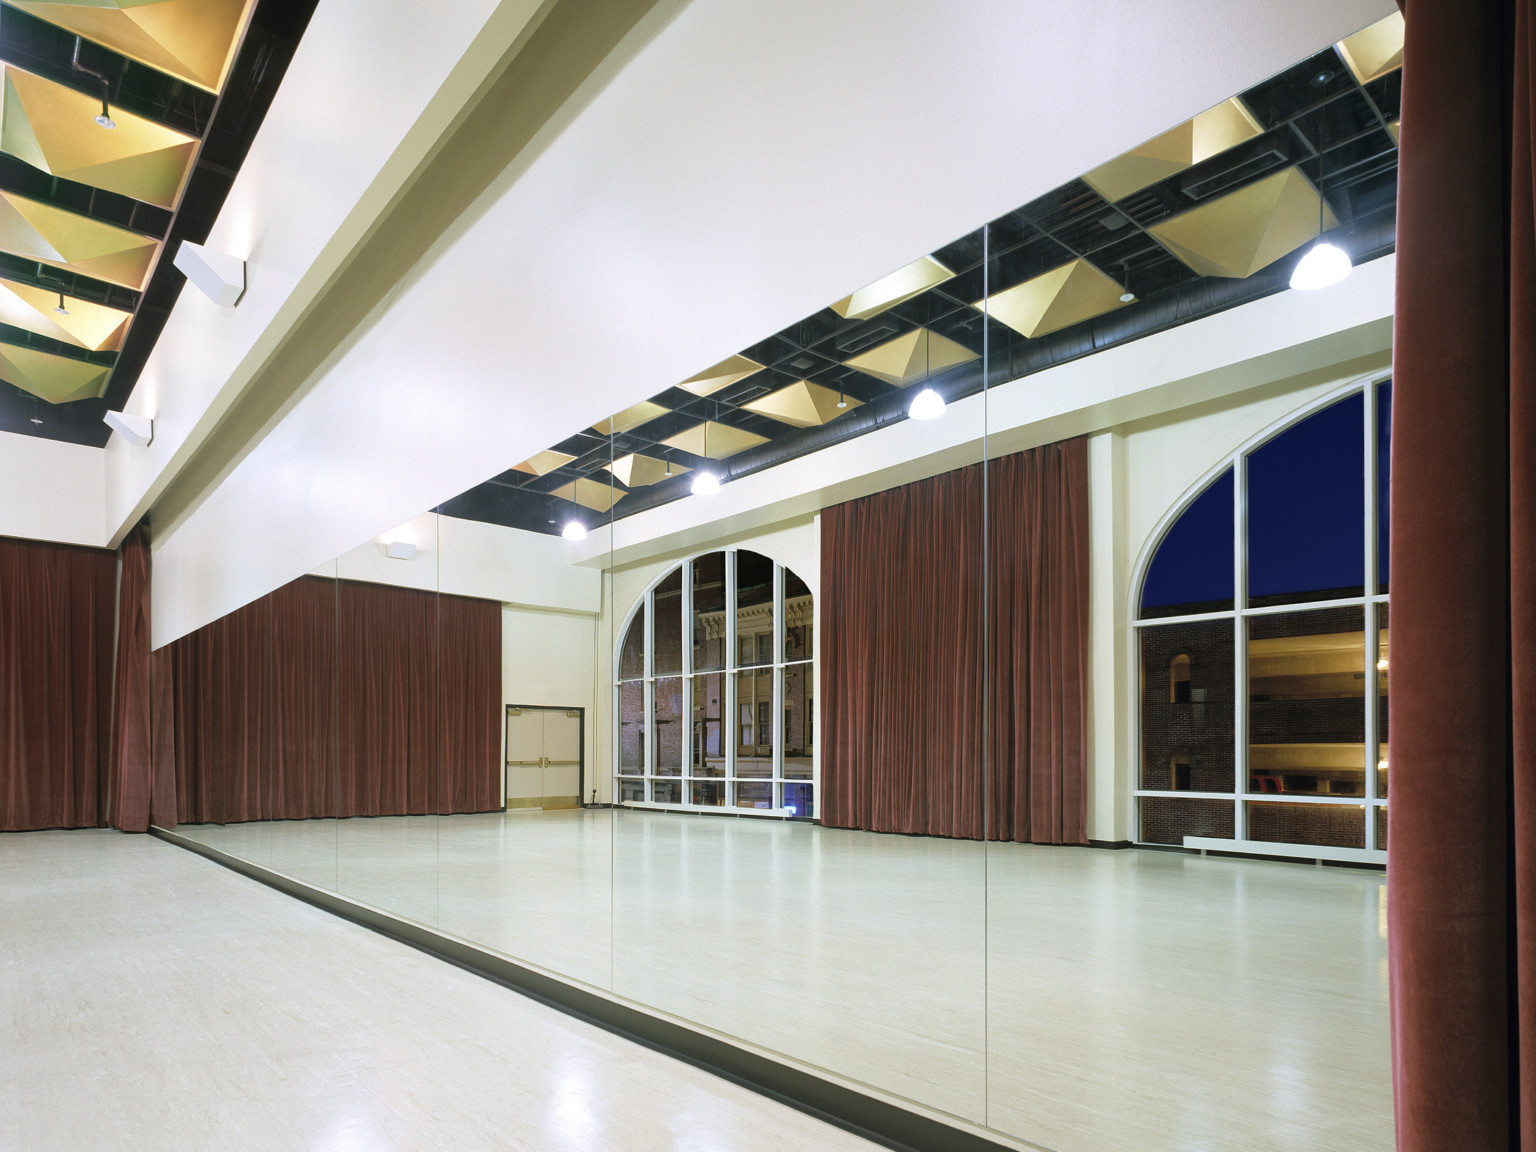 Reahearsal and gathering place with mirror wall reflecting arching floor to ceiling windows and dark red brown curtains